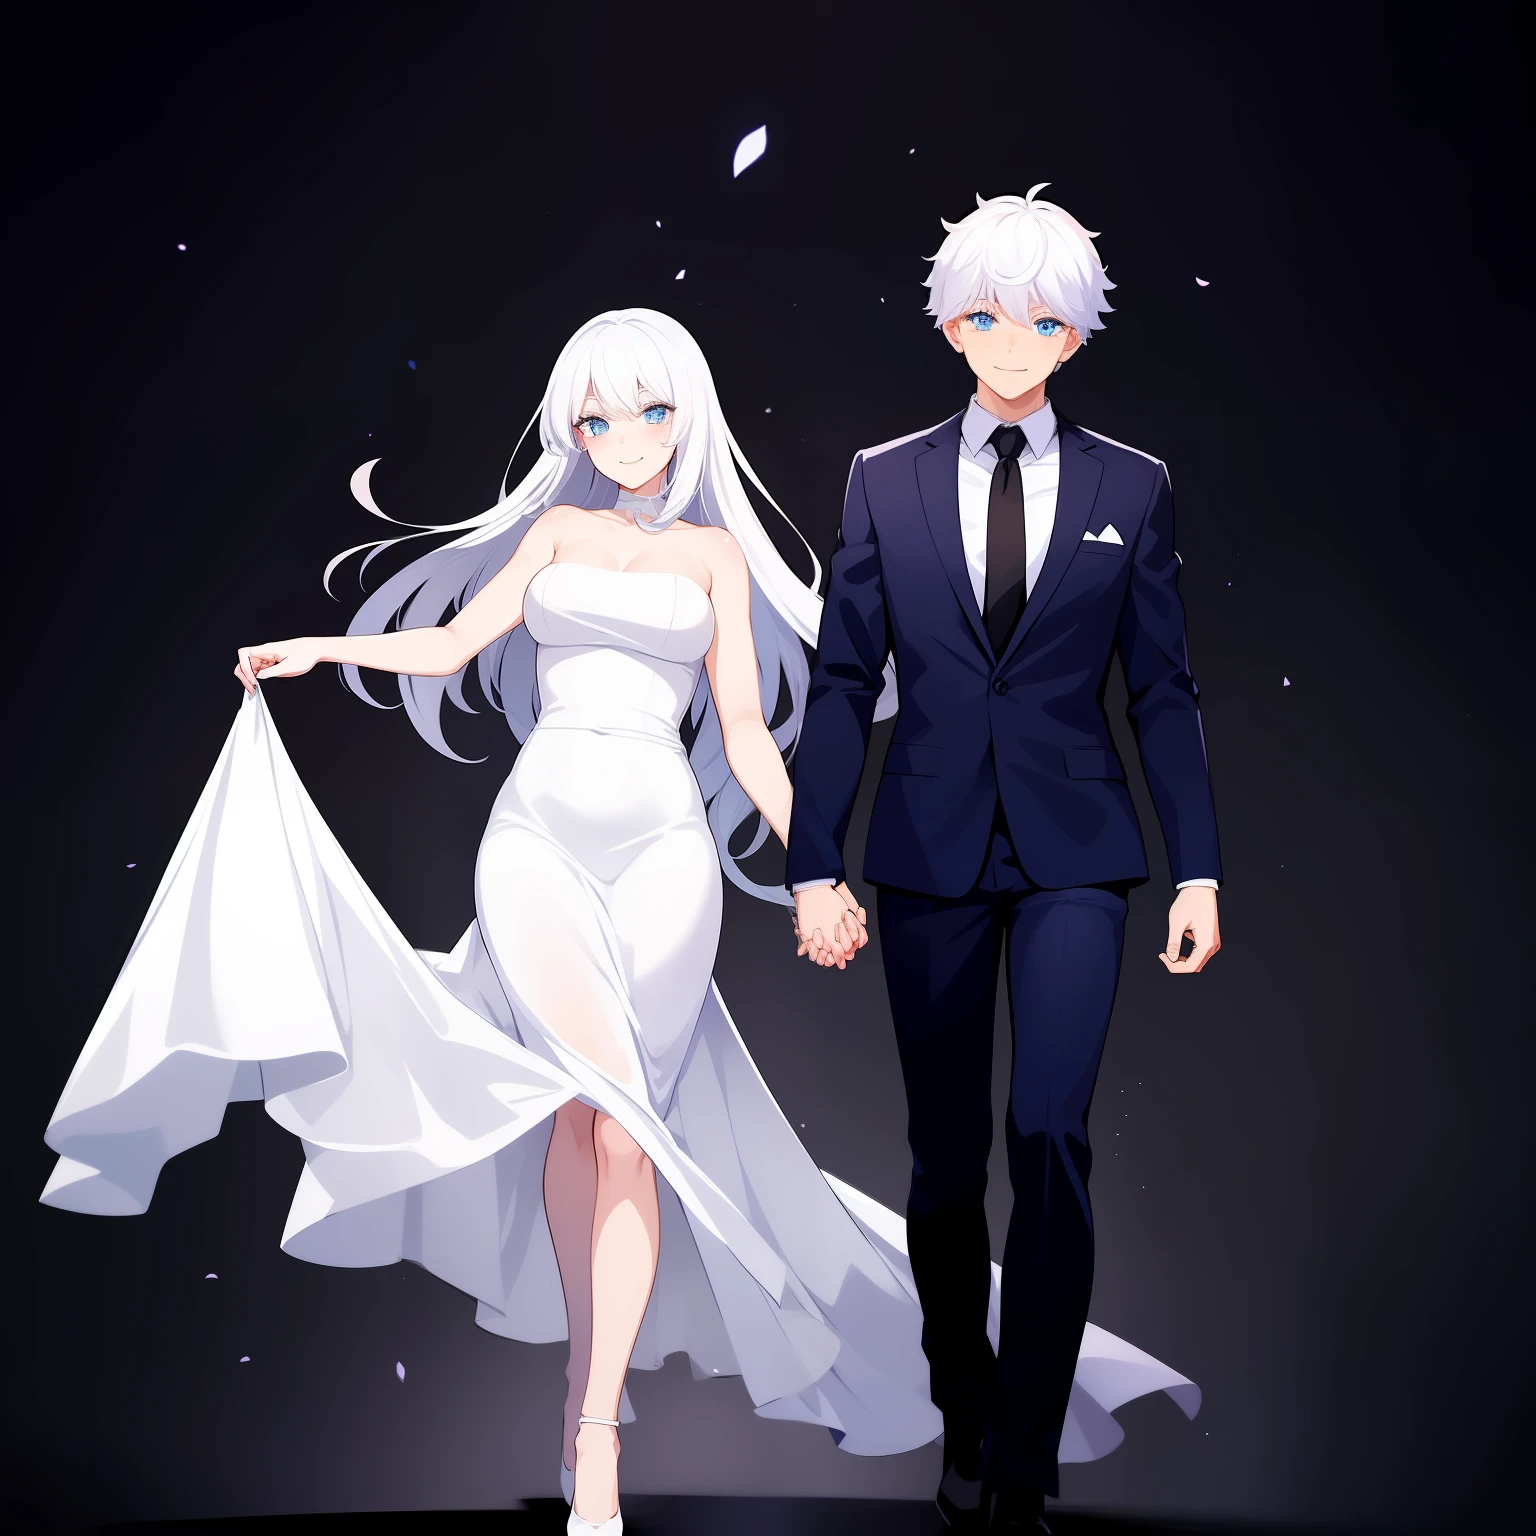 wedding, bride with white hair, white bridal outfit, female's blue eyes, soft smile) ( boy, gojo, white hair groom, black suit, blue eyes, smile) are holding hands and medium background